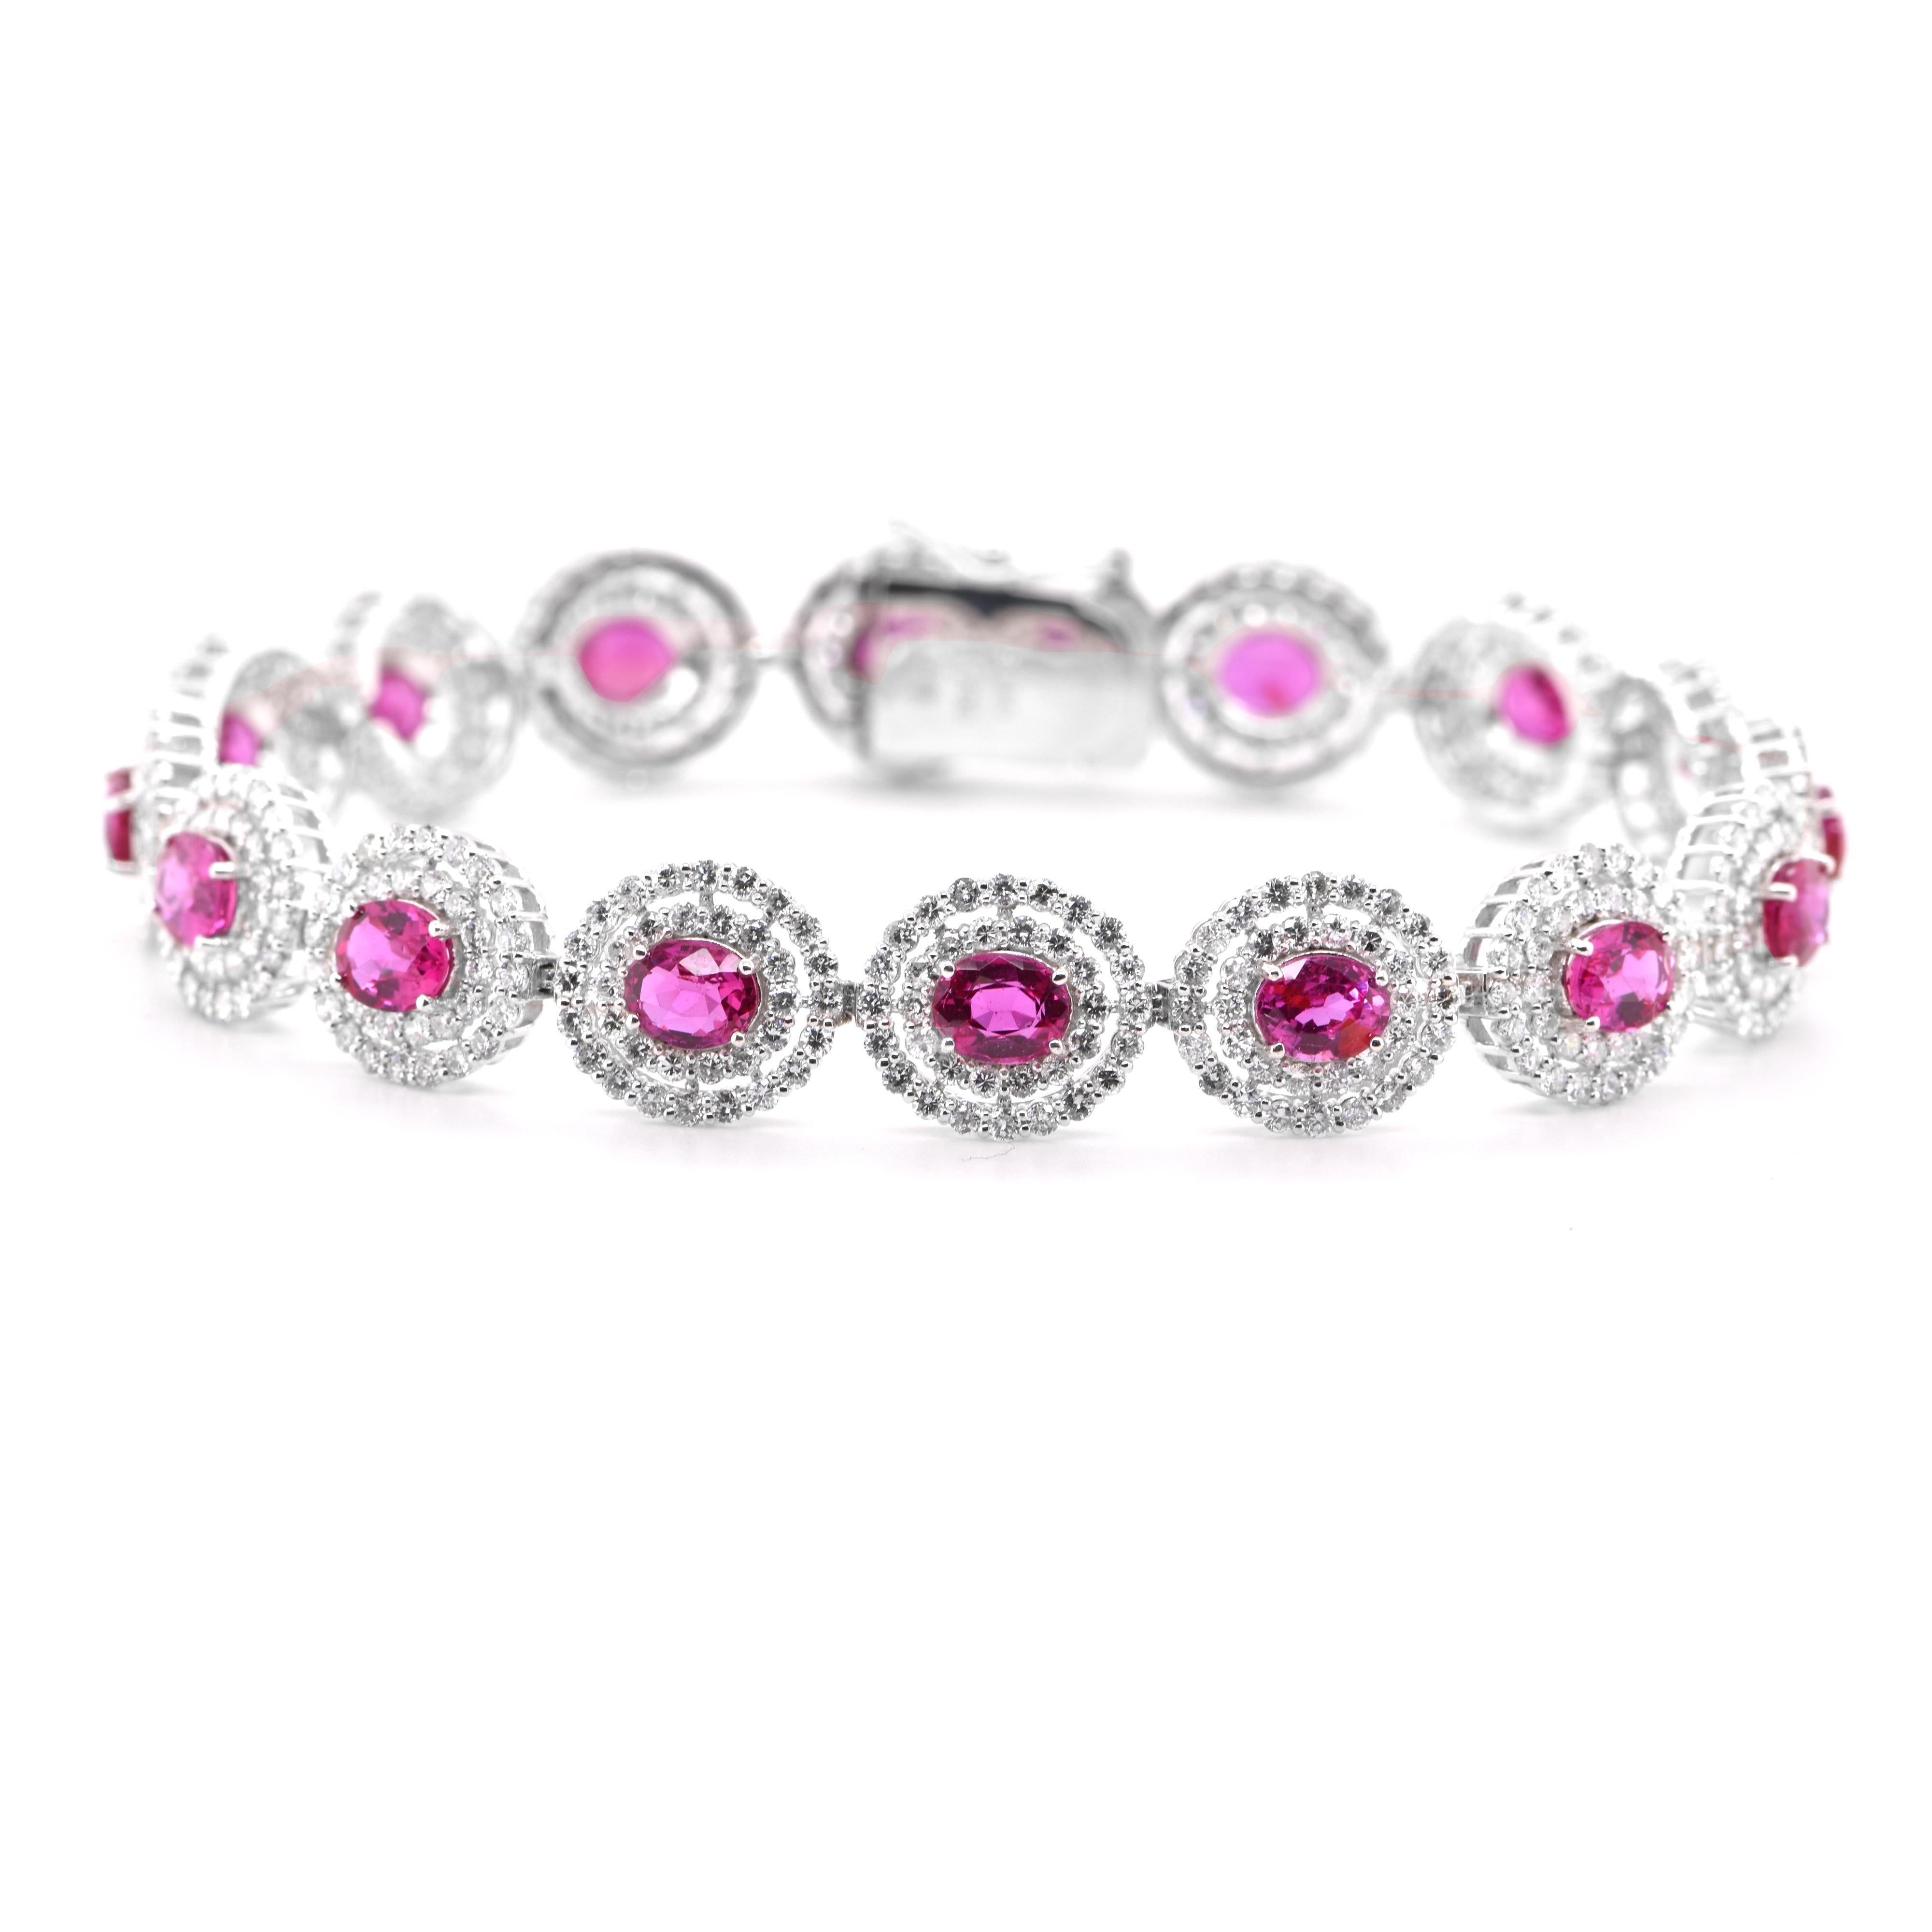 A beautiful Tennis Bracelet featuring a total of 7.36 Carats of Natural Rubies and 4.15 Carats of Diamond Accents set in Platinum. The Rubies are of 6x4 mm size. Rubies are referred to as 